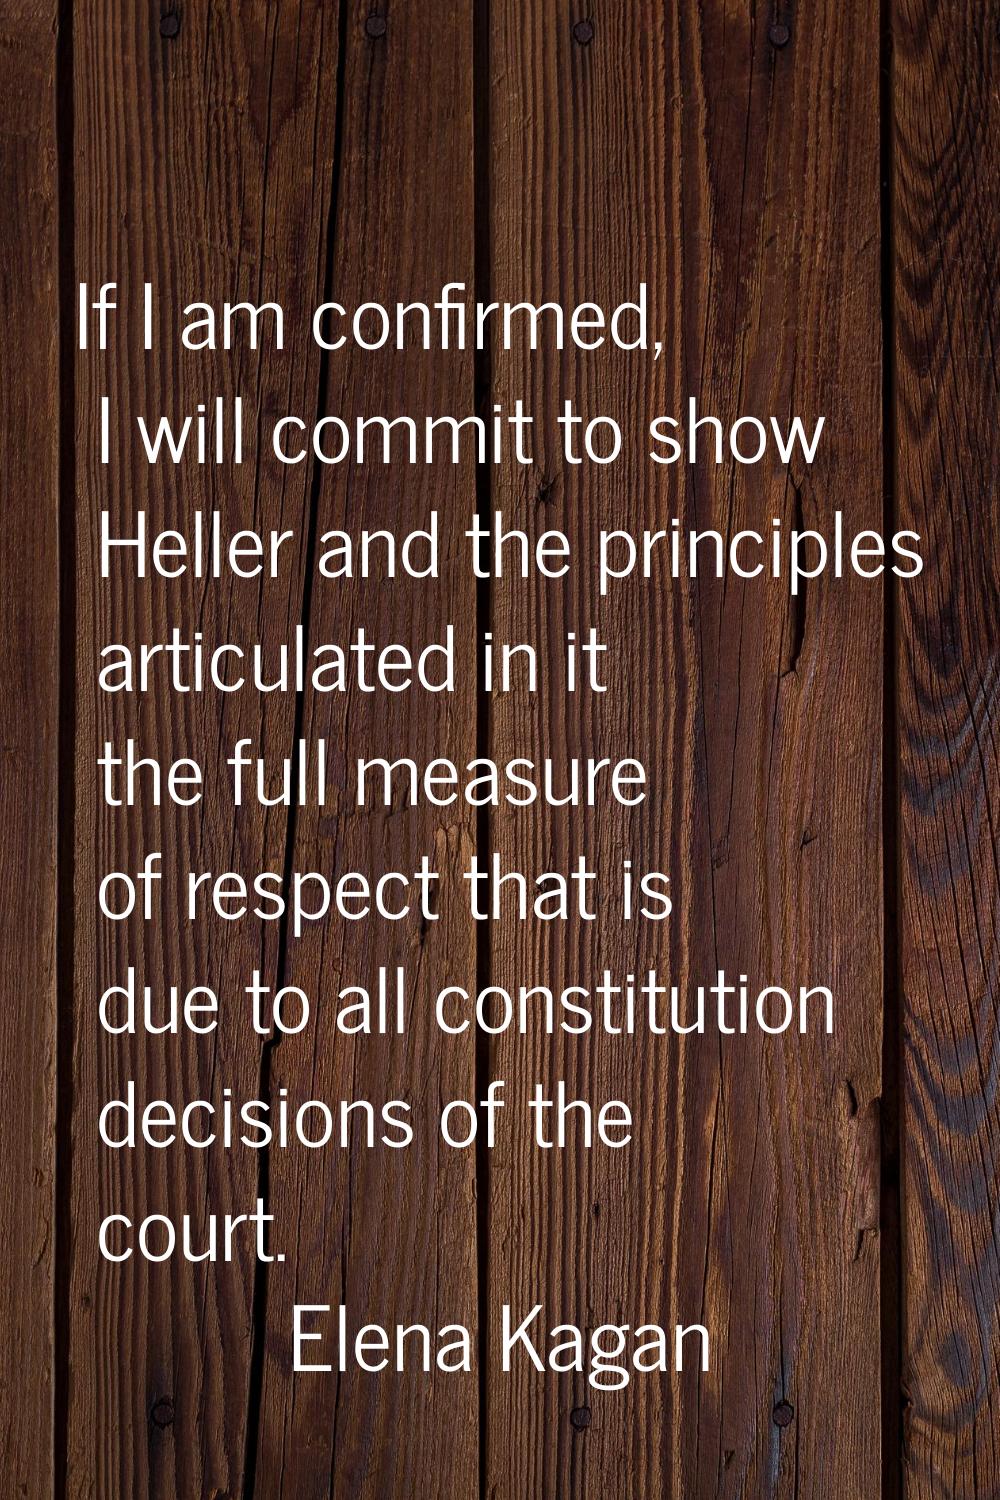 If I am confirmed, I will commit to show Heller and the principles articulated in it the full measu